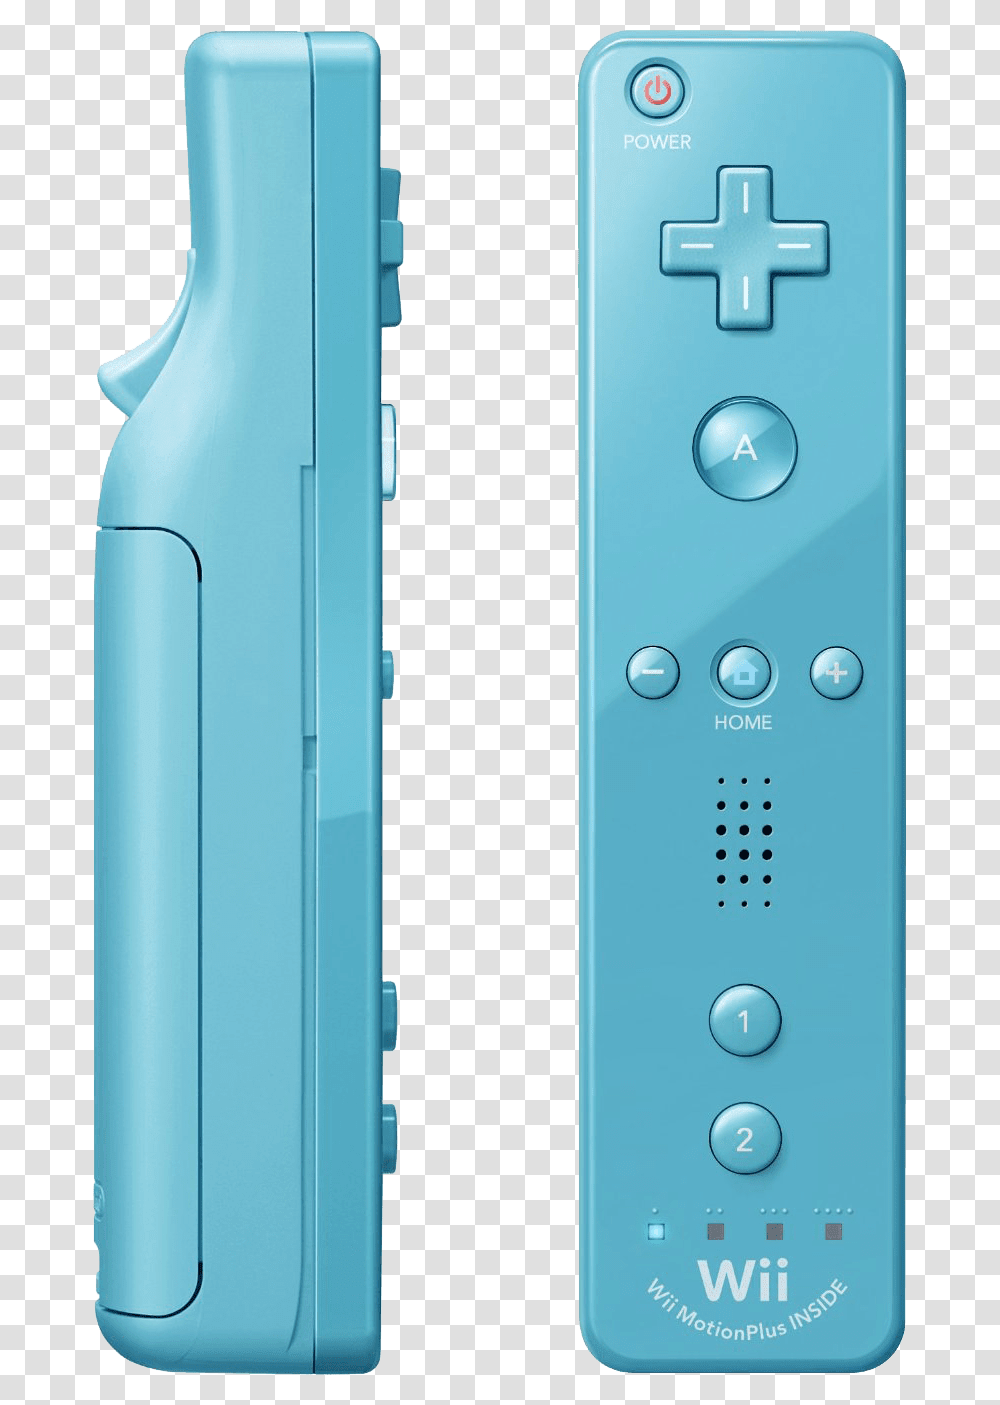 Wii Plus Remote Blue Wii Remote Plus, Electronics, Luggage, Suitcase Transparent Png